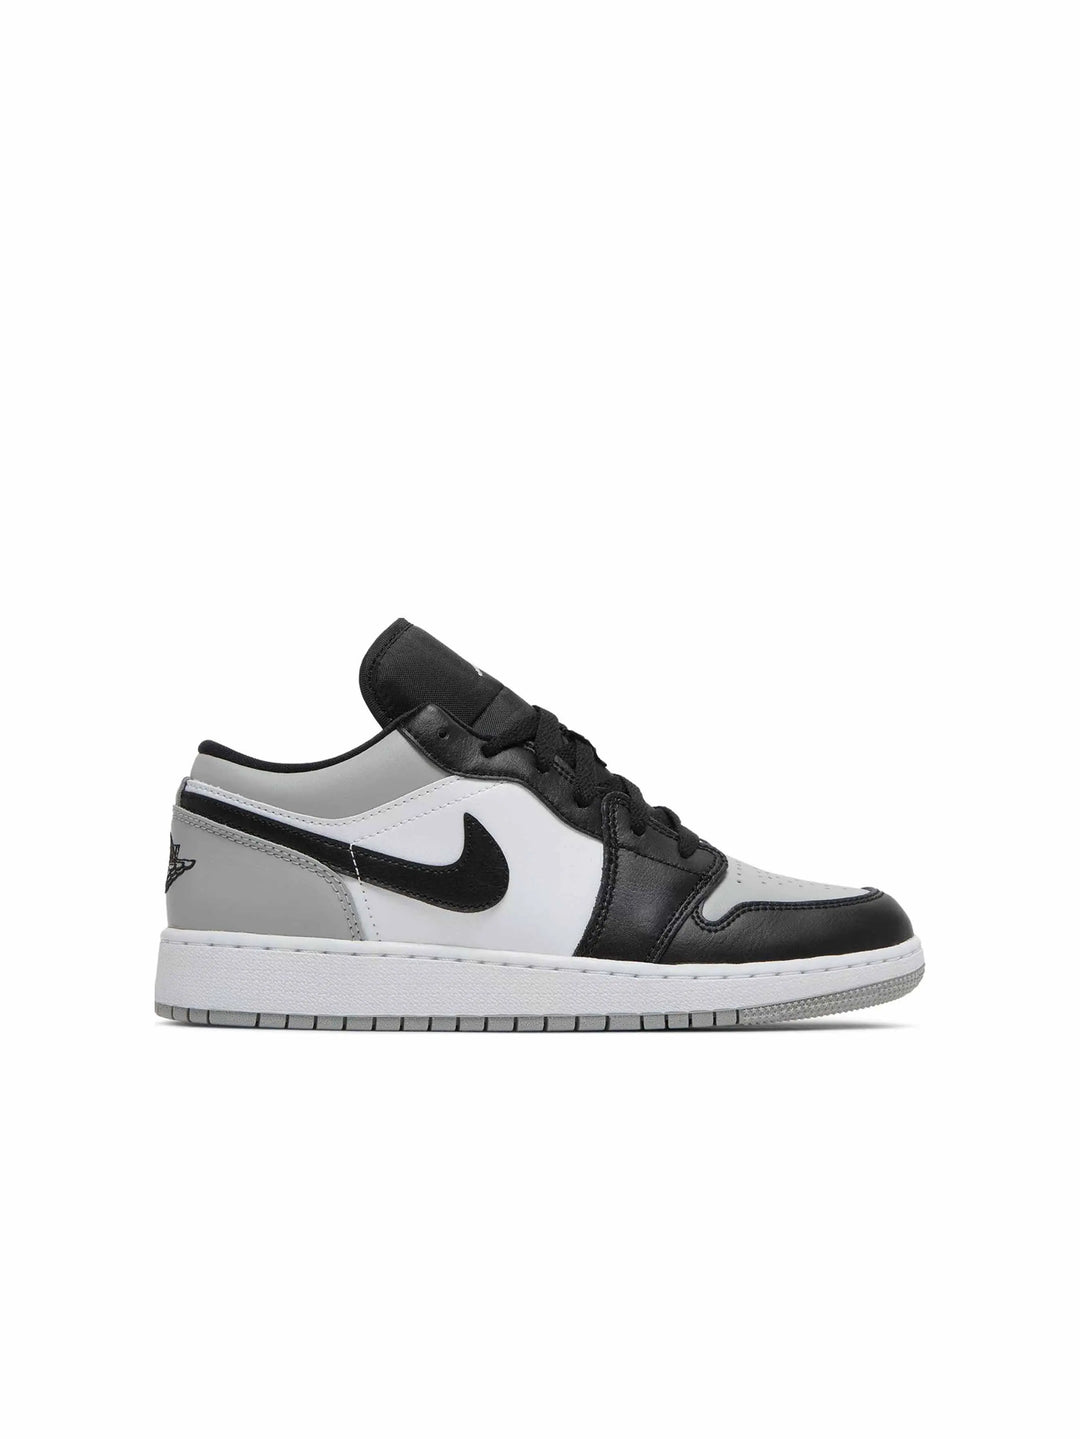 Nike Air Jordan 1 Low Shadow Toe (GS) in Auckland, New Zealand - Shop name